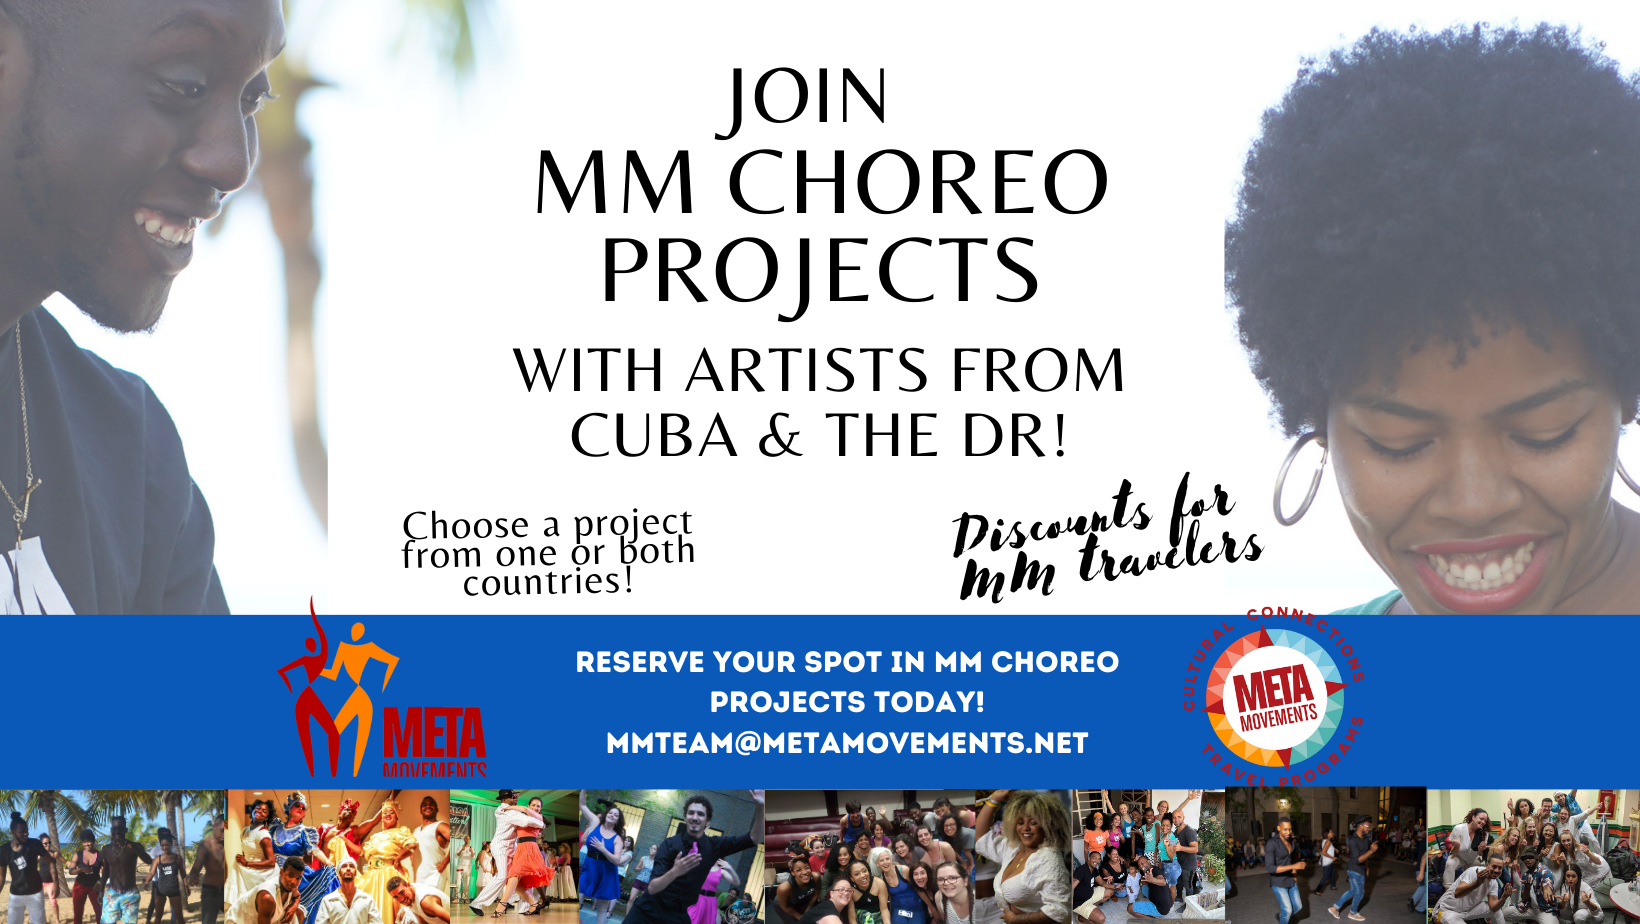 MM Choreo Projects poster with photos of groups of dancers and workshop information.